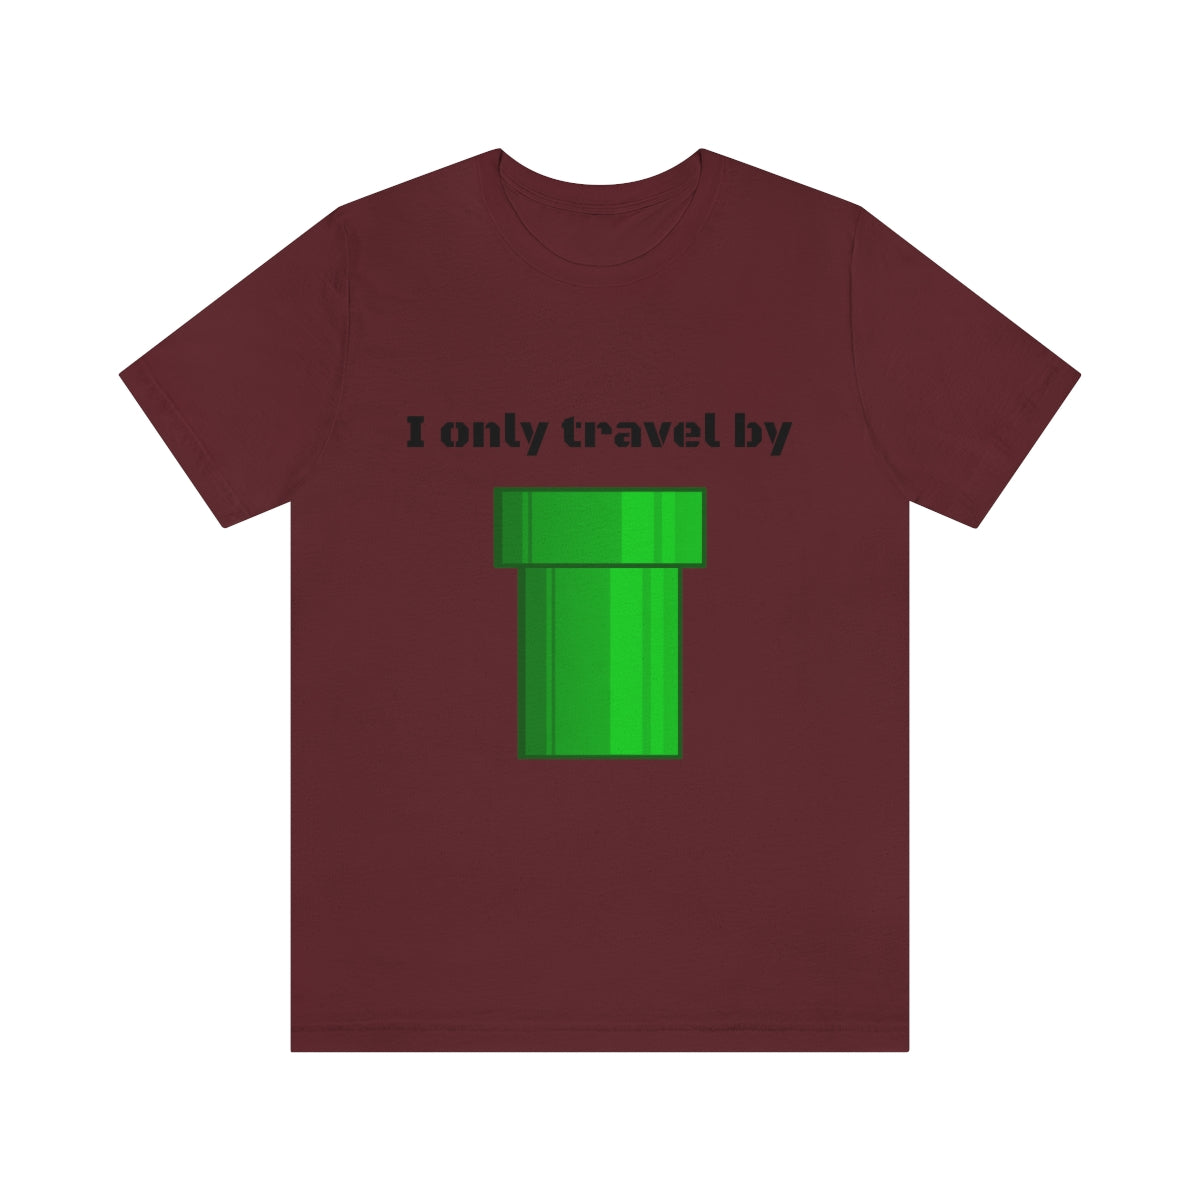 I only travel by "pipe" - Funny gamer - Unisex Short Sleeve Tee - CrazyTomTShirts